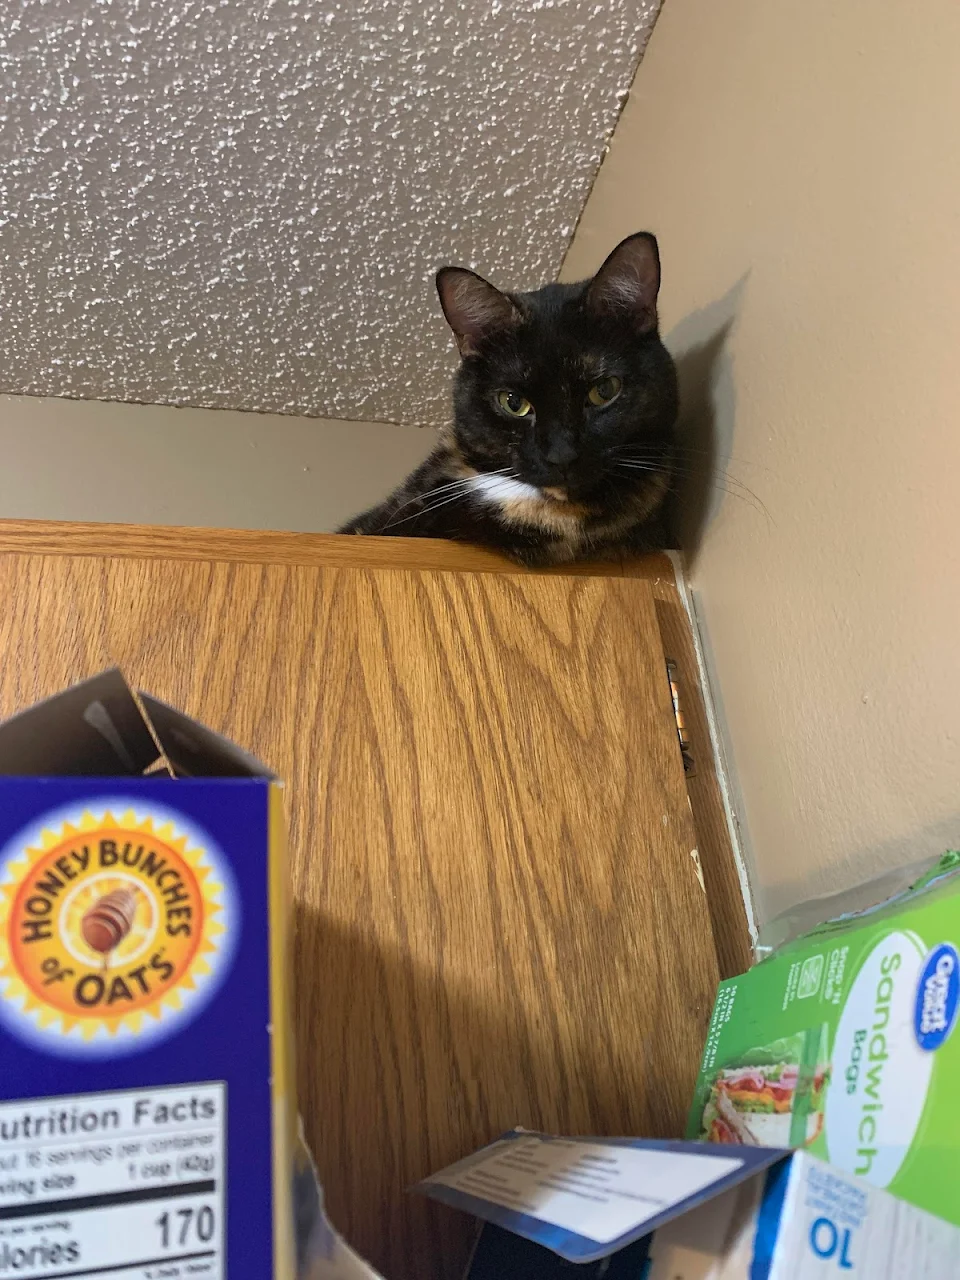 Scully likes to sit up on the cabinet and judge what I eat for breakfast